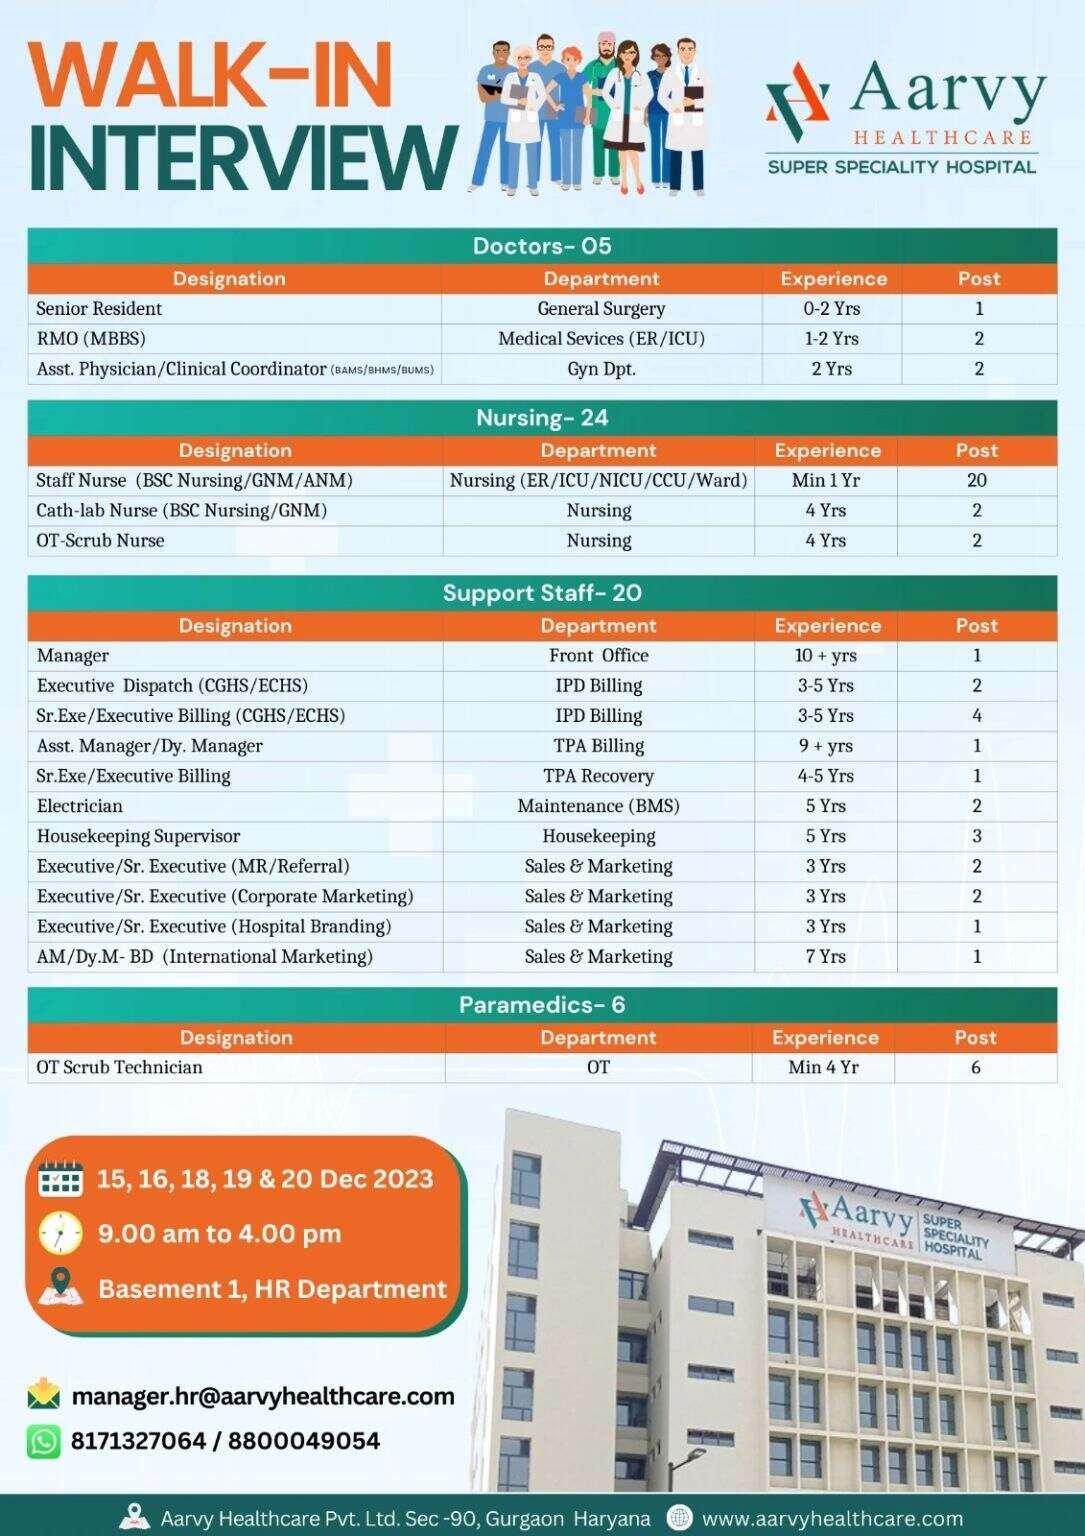 Aarvy SUPER SPECIALITY HOSPITAL